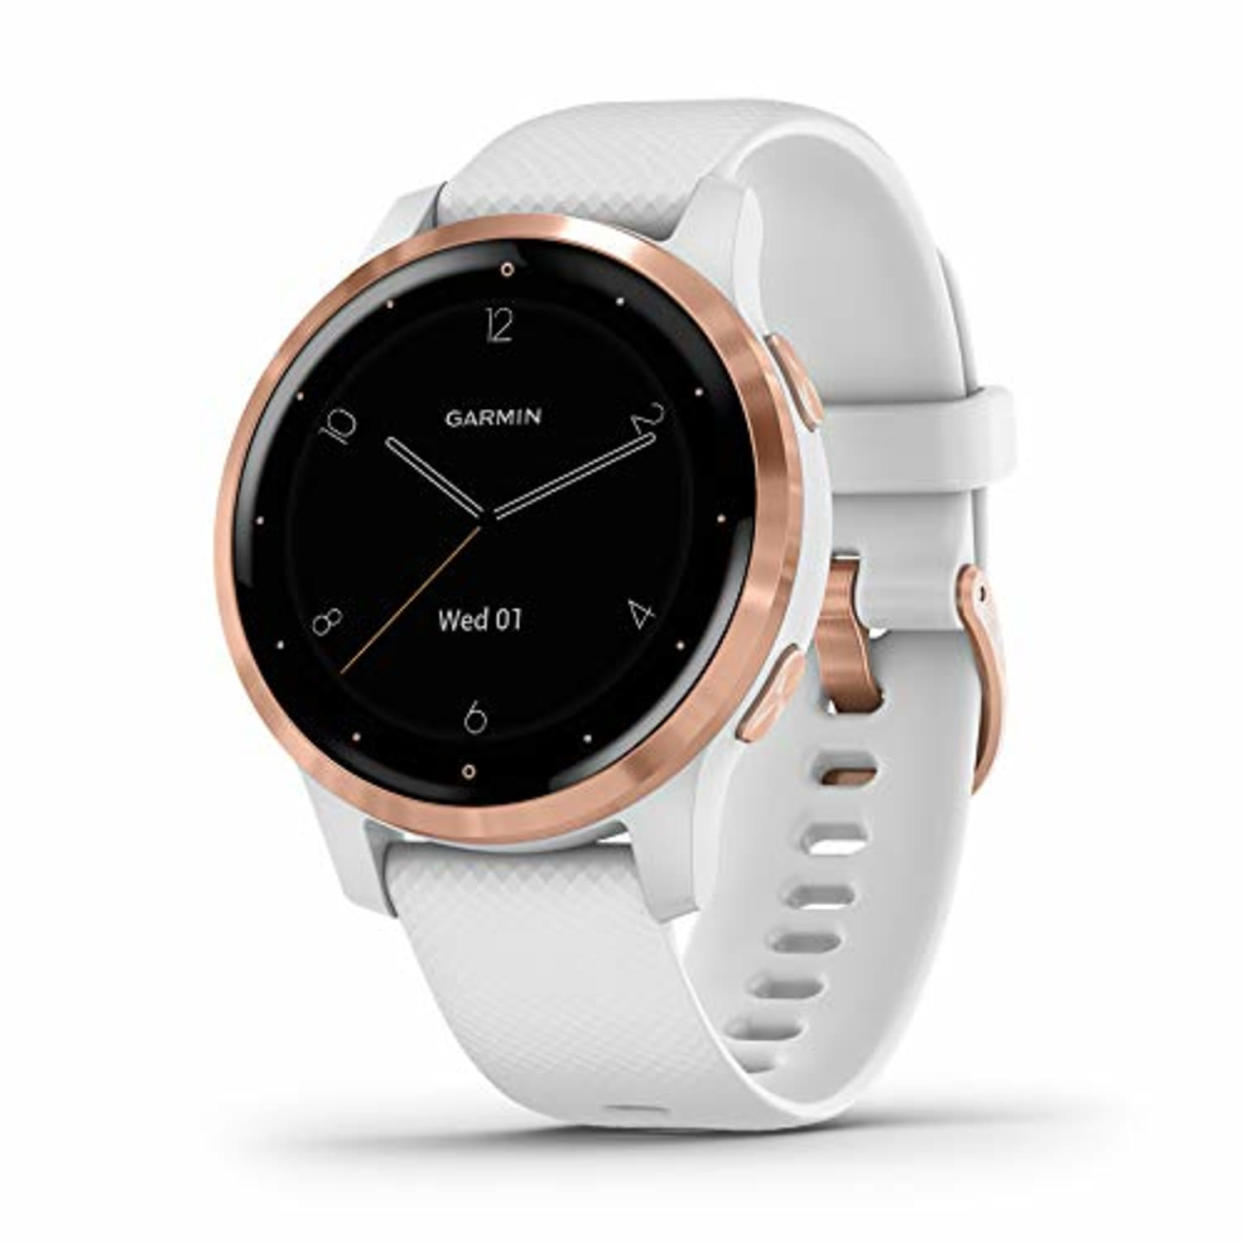 Garmin vivoactive 4S, Smaller-Sized GPS Smartwatch, Features Music, Body Energy Monitoring, Animated Workouts, Pulse Ox Sensors, Rose Gold with White Band (AMAZON)